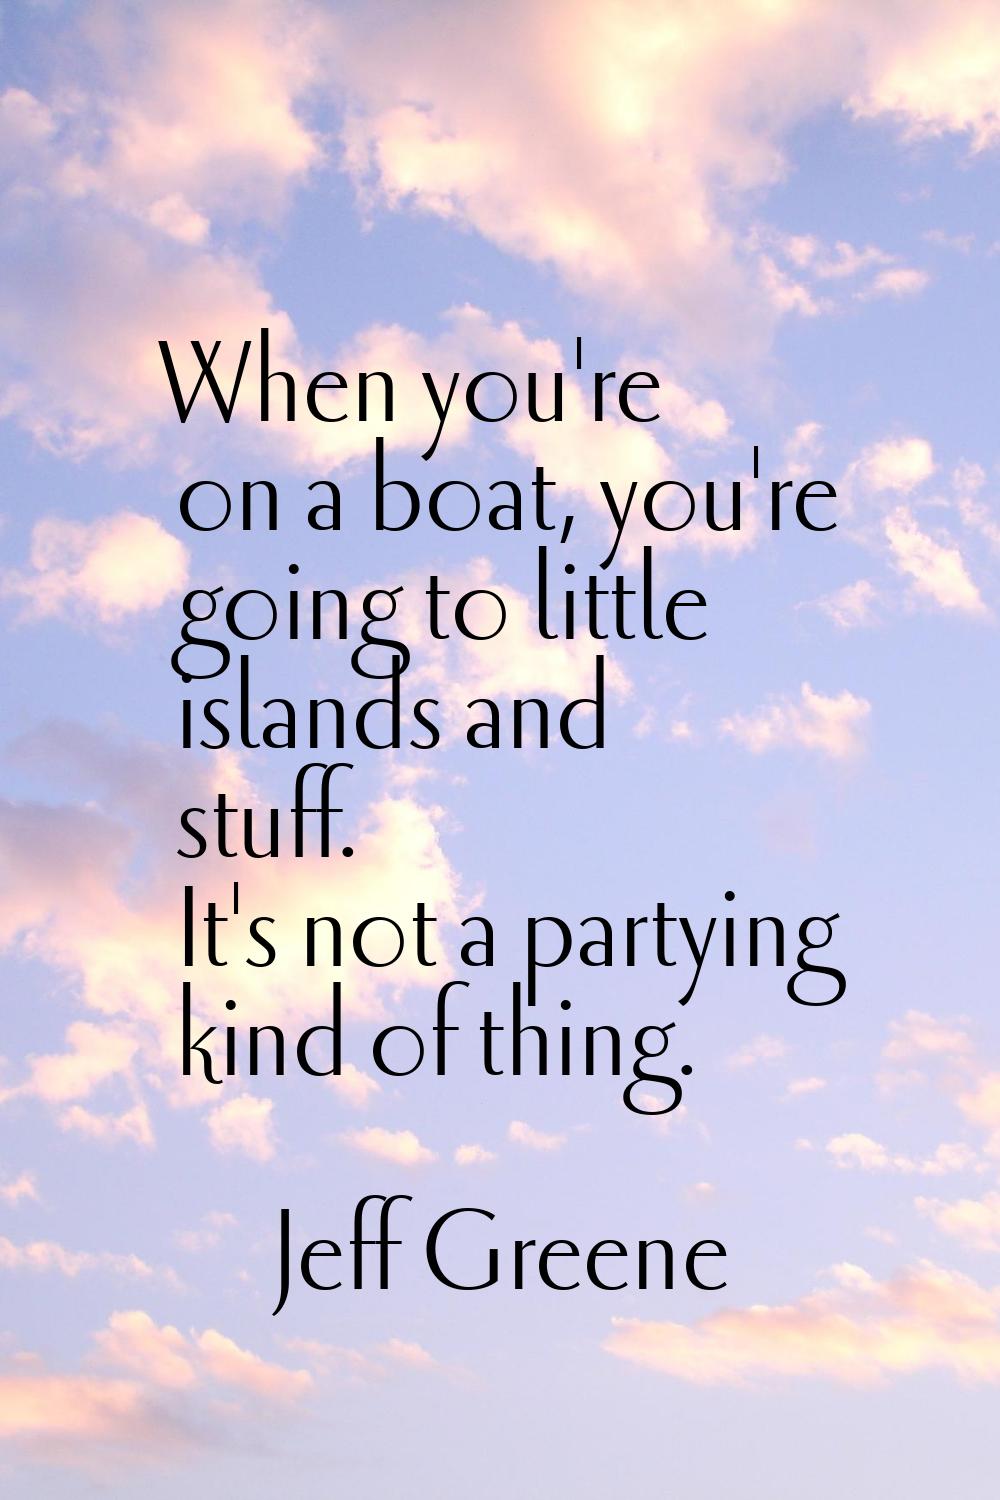 When you're on a boat, you're going to little islands and stuff. It's not a partying kind of thing.